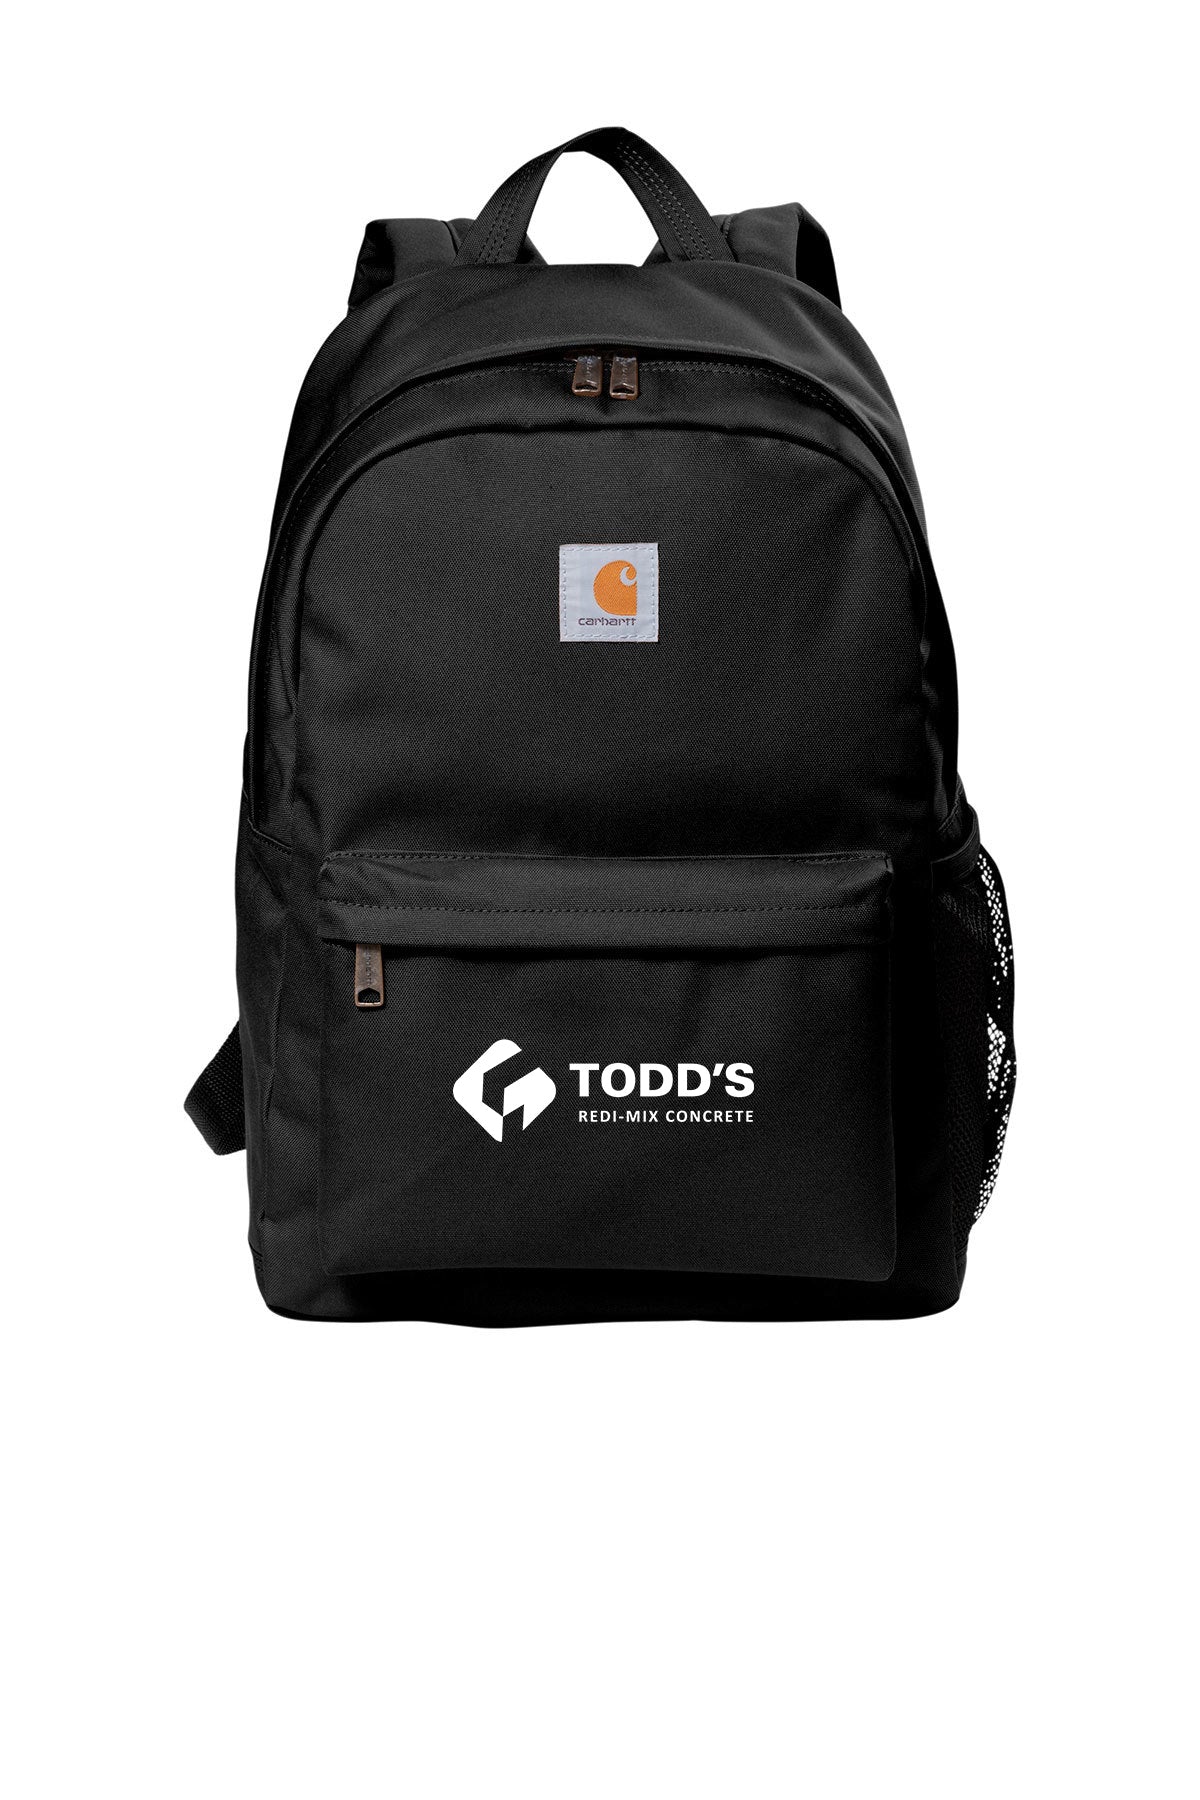 Todd's Redi-Mix Carhartt Canvas Backpack